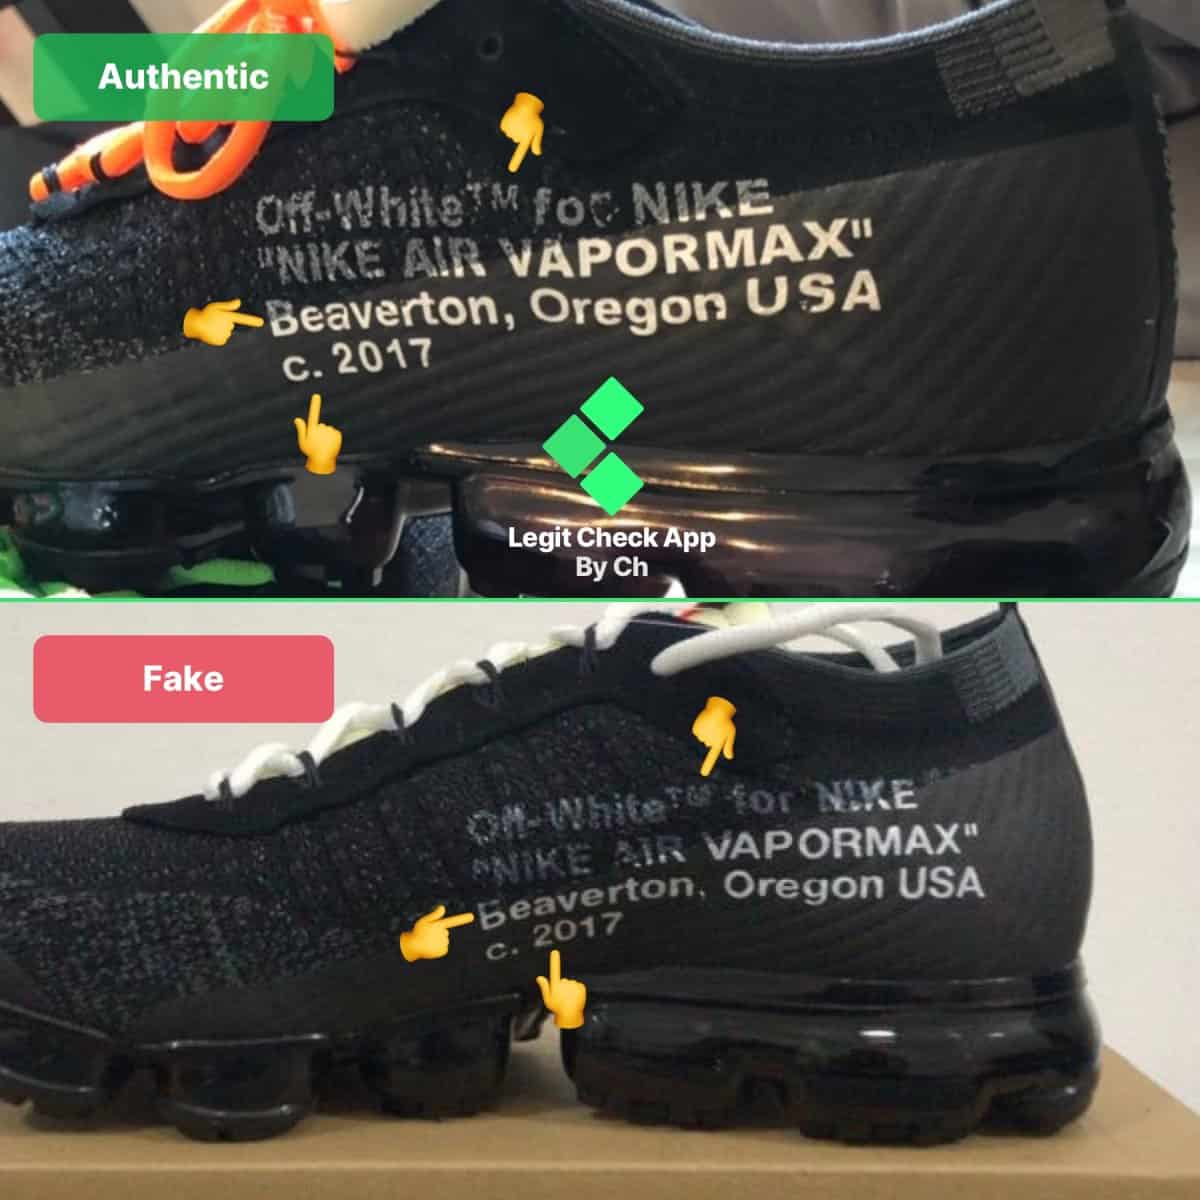 Fake Vs Real Off-White Vapormax Guide 